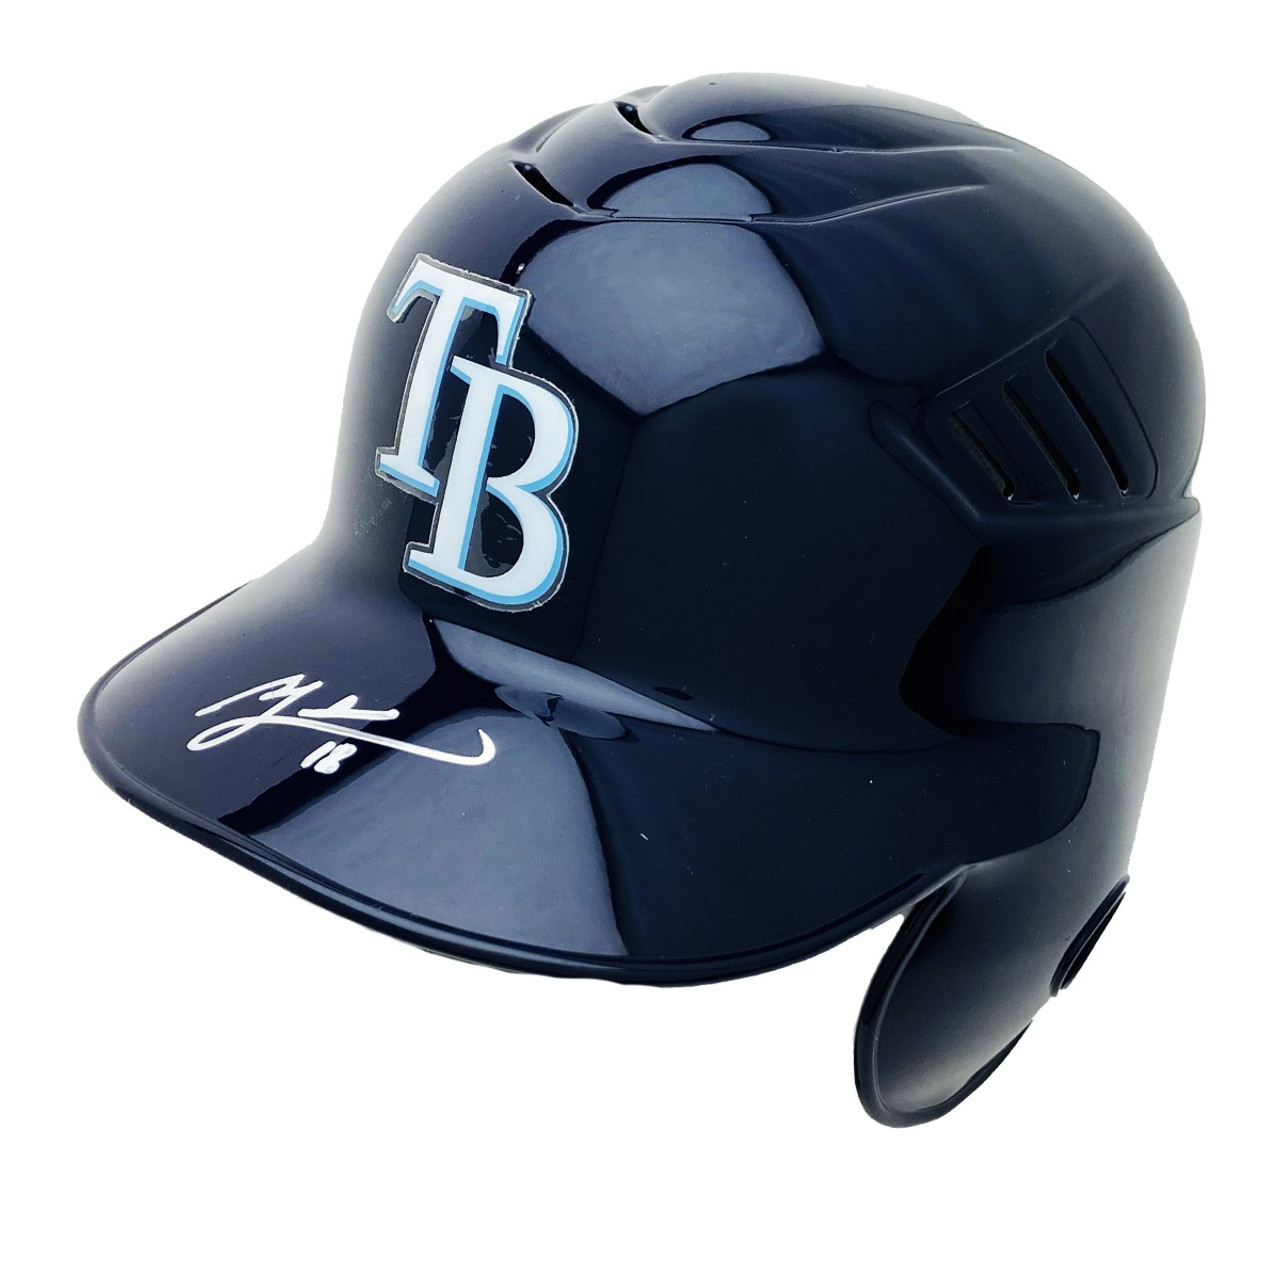 Ben Zobrist Autographed Tampa Bay Rays Batting Helmet - Certified - Prime  One Sports